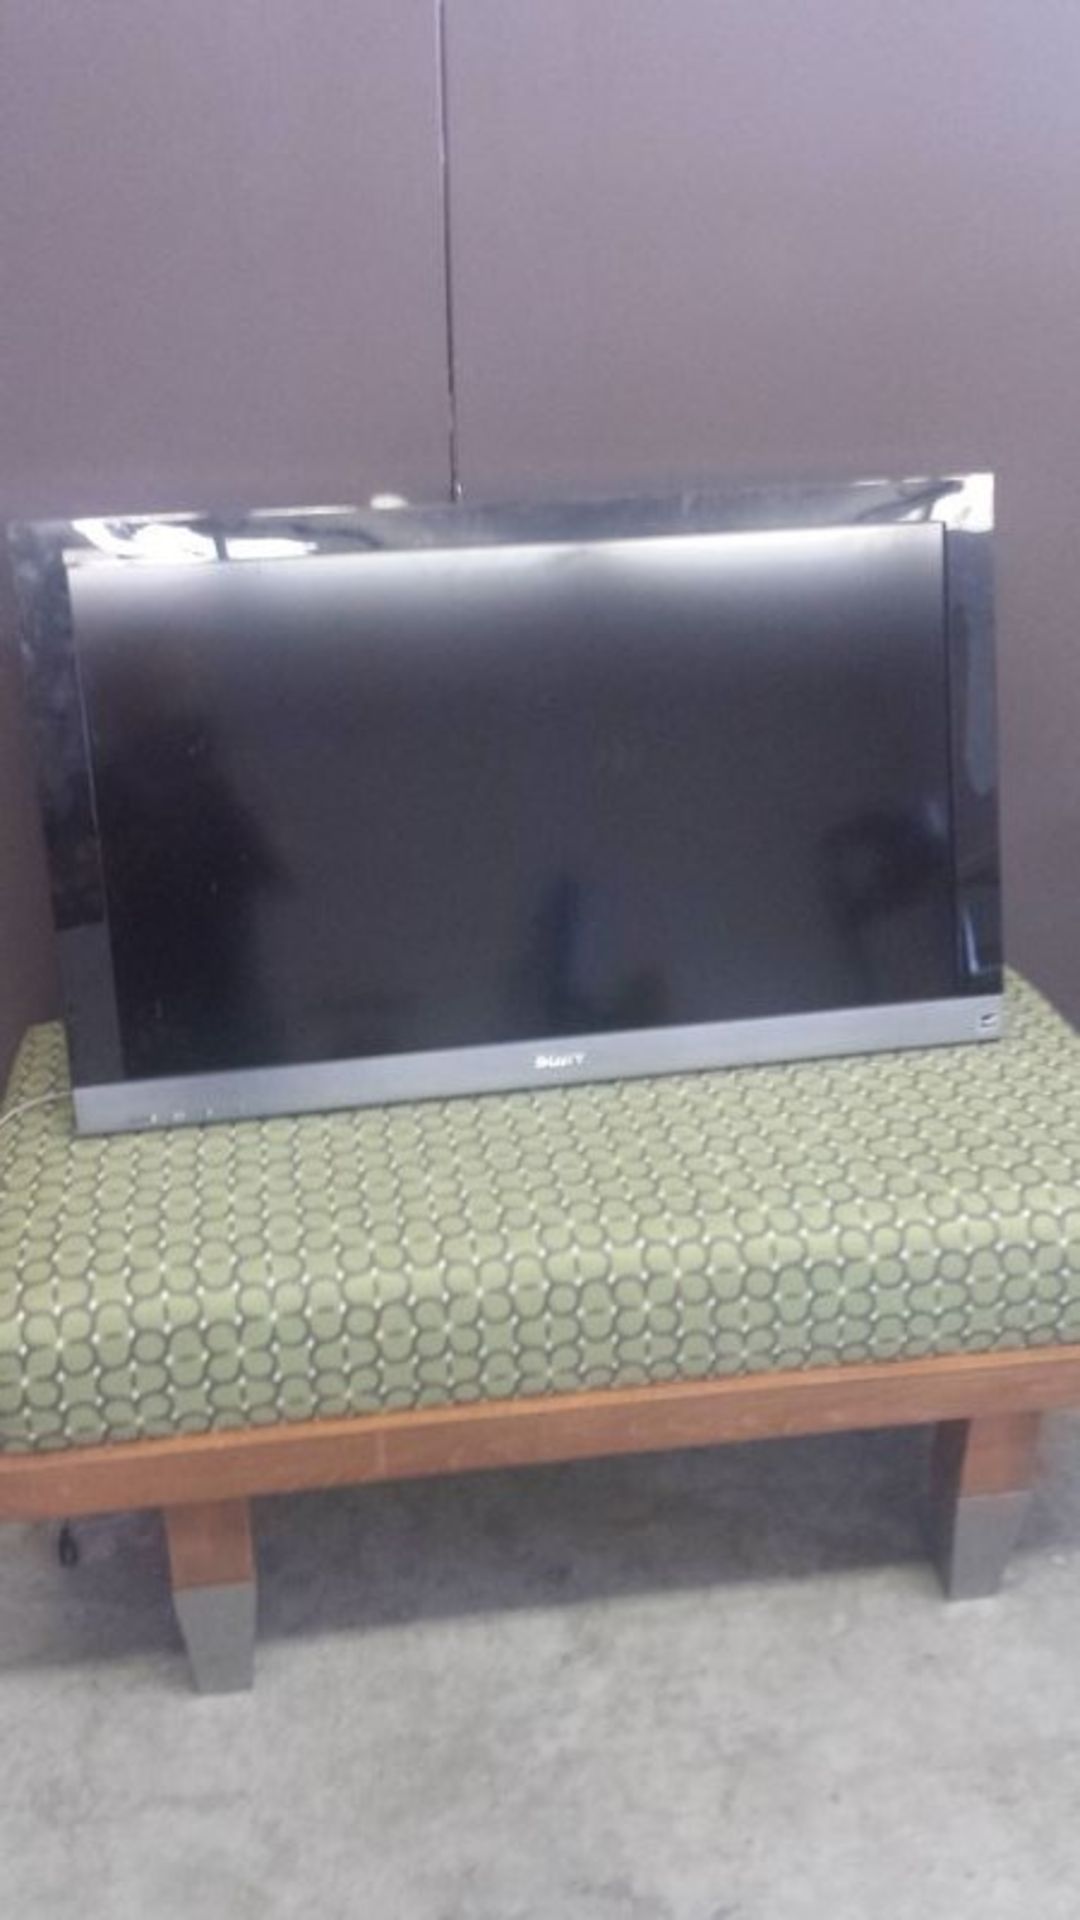 40" Sony flat screen with wall mount